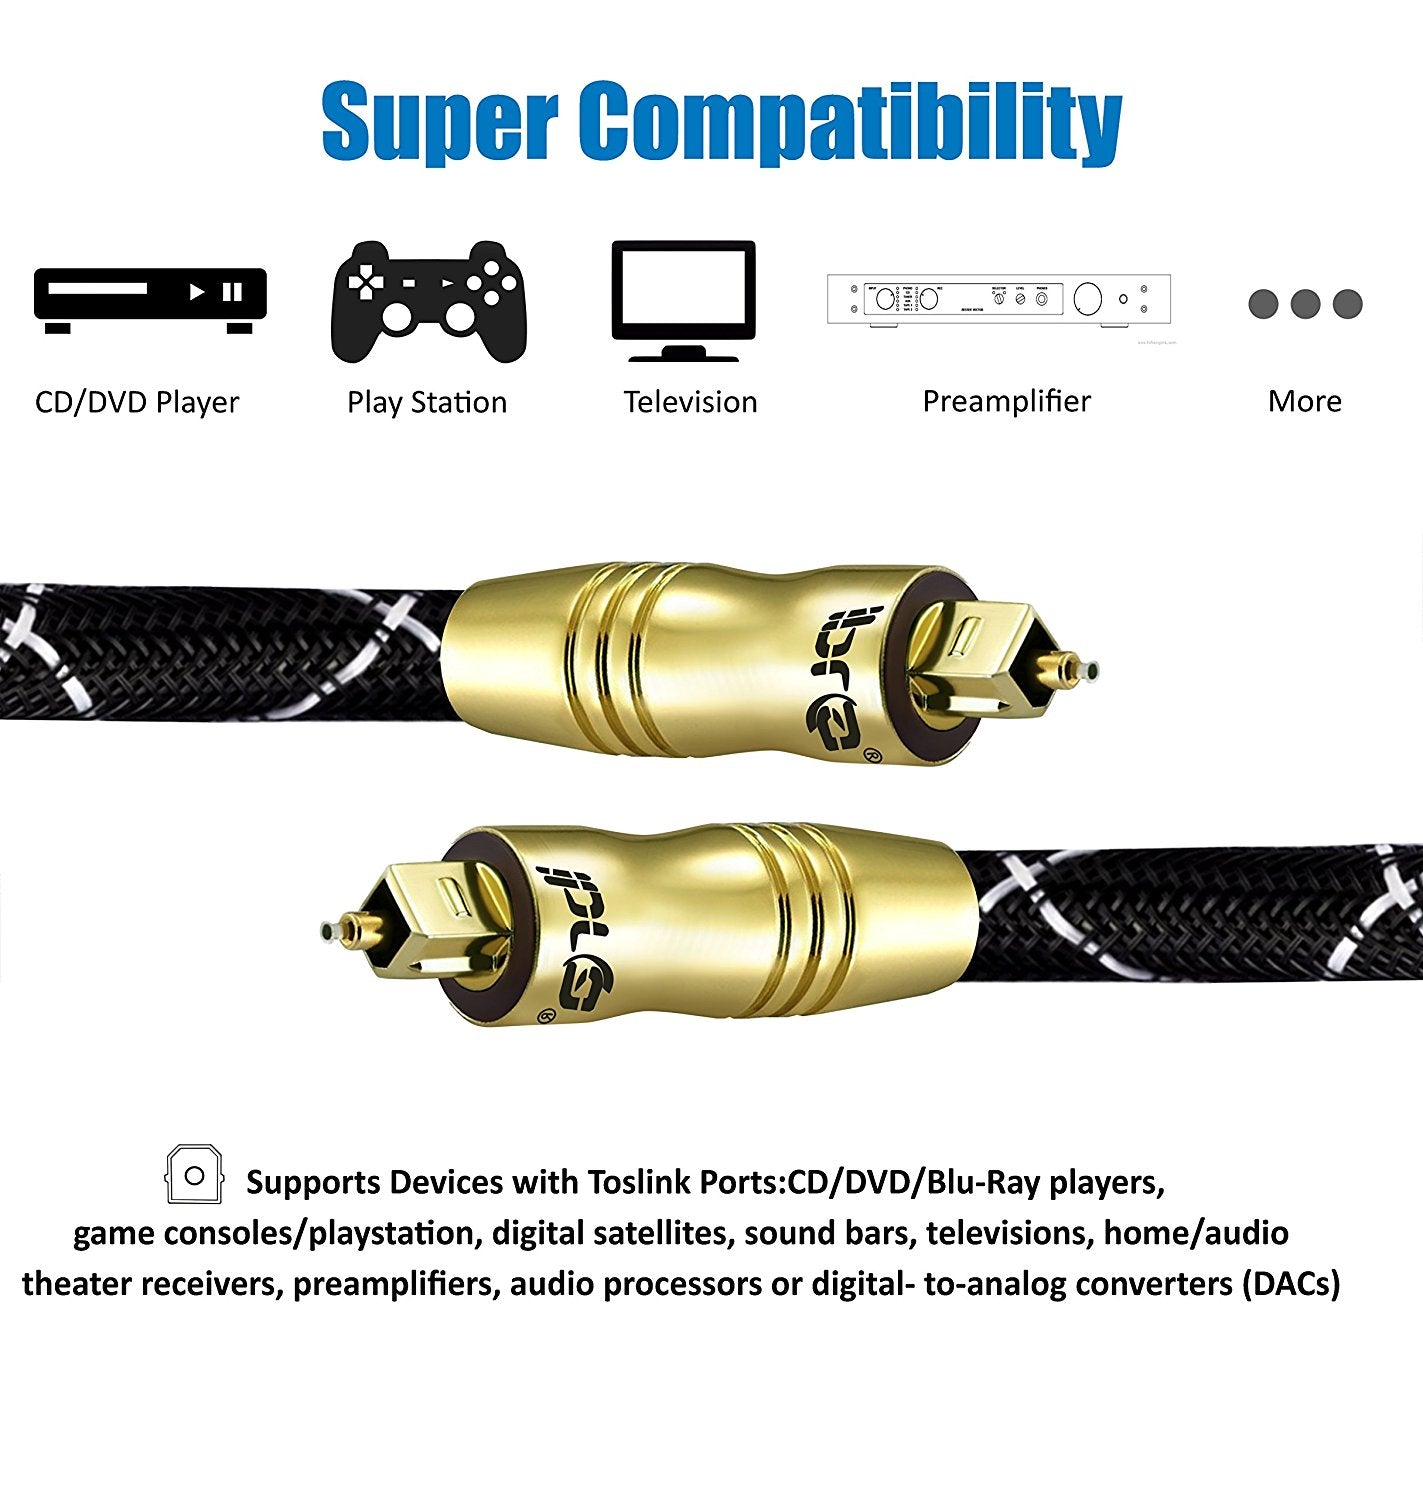 IBRA Black Master 4M - Optical TOSLINK Digital Audio Cable - Fiber Optic Cable - 24K Gold Casing - Compatible with PS3,Sky HD, HDtvs, Blu-rays, AV Amps